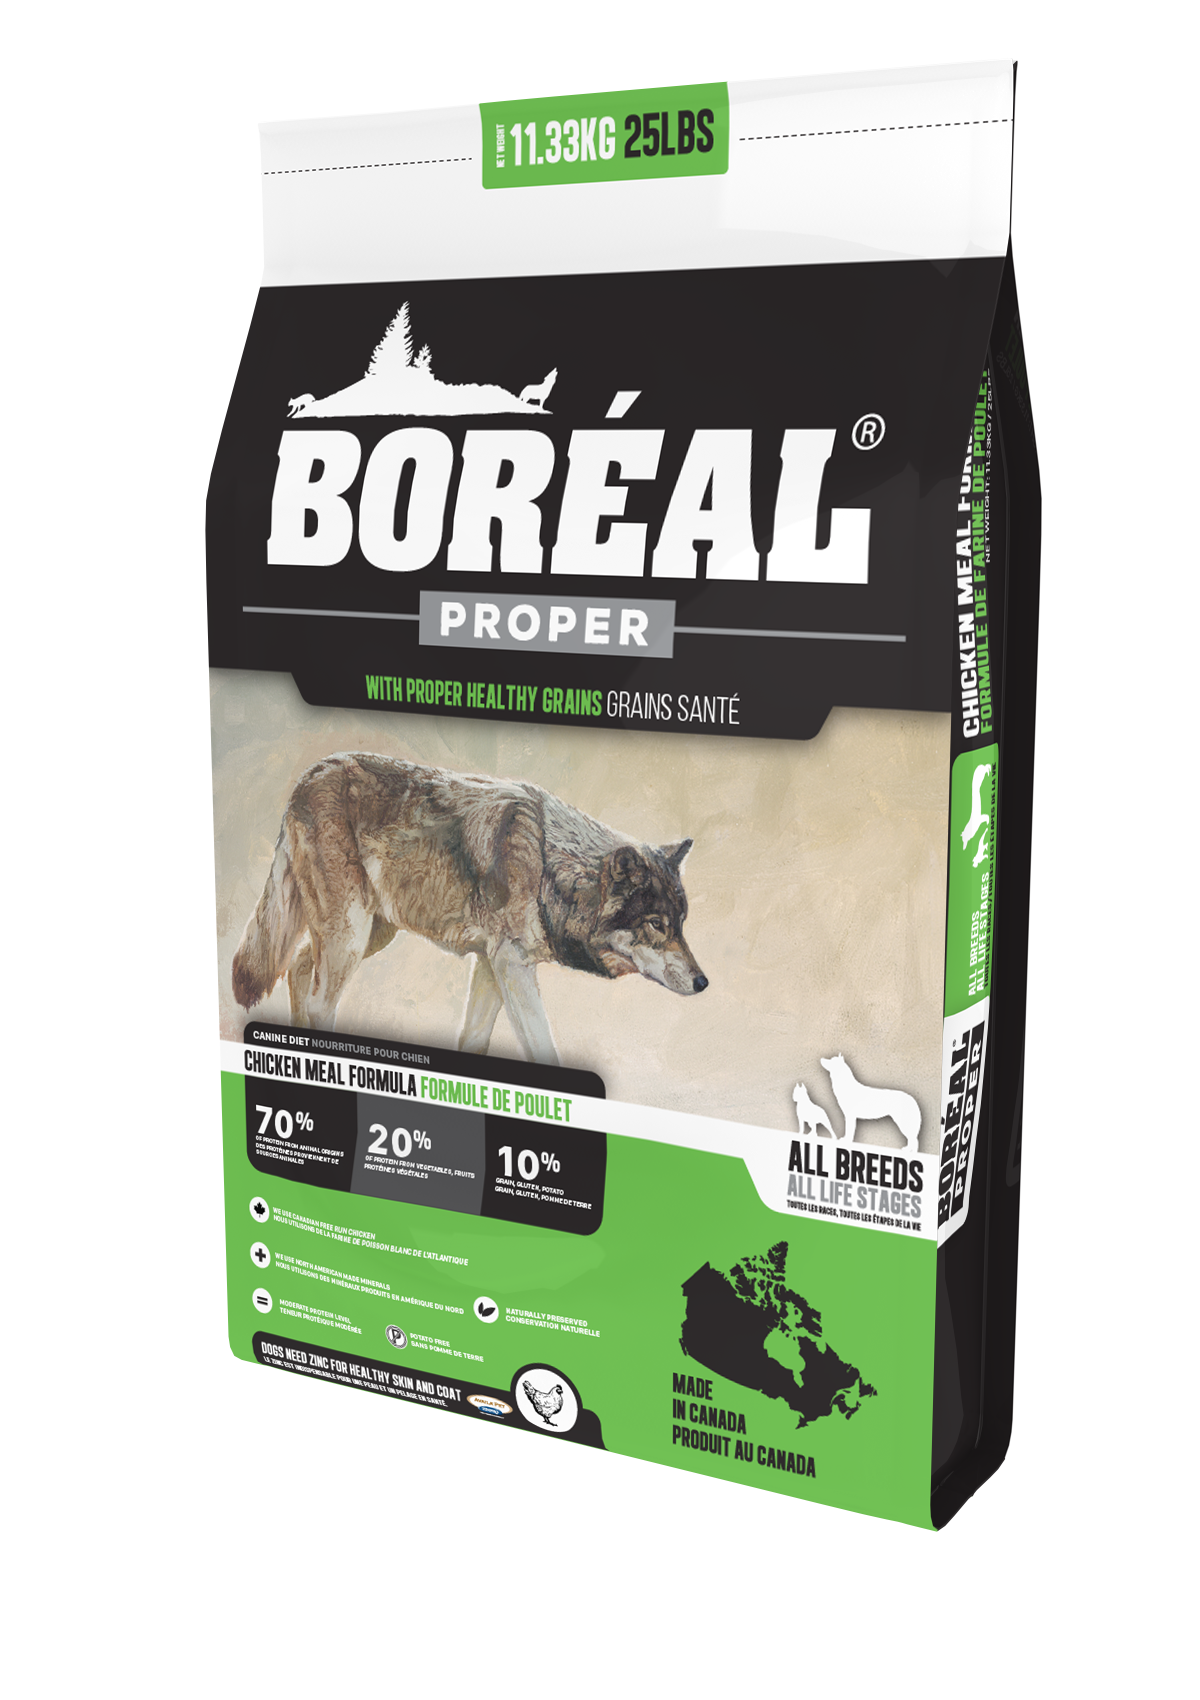 Boreal Proper Chicken Meal Low Carb Grains